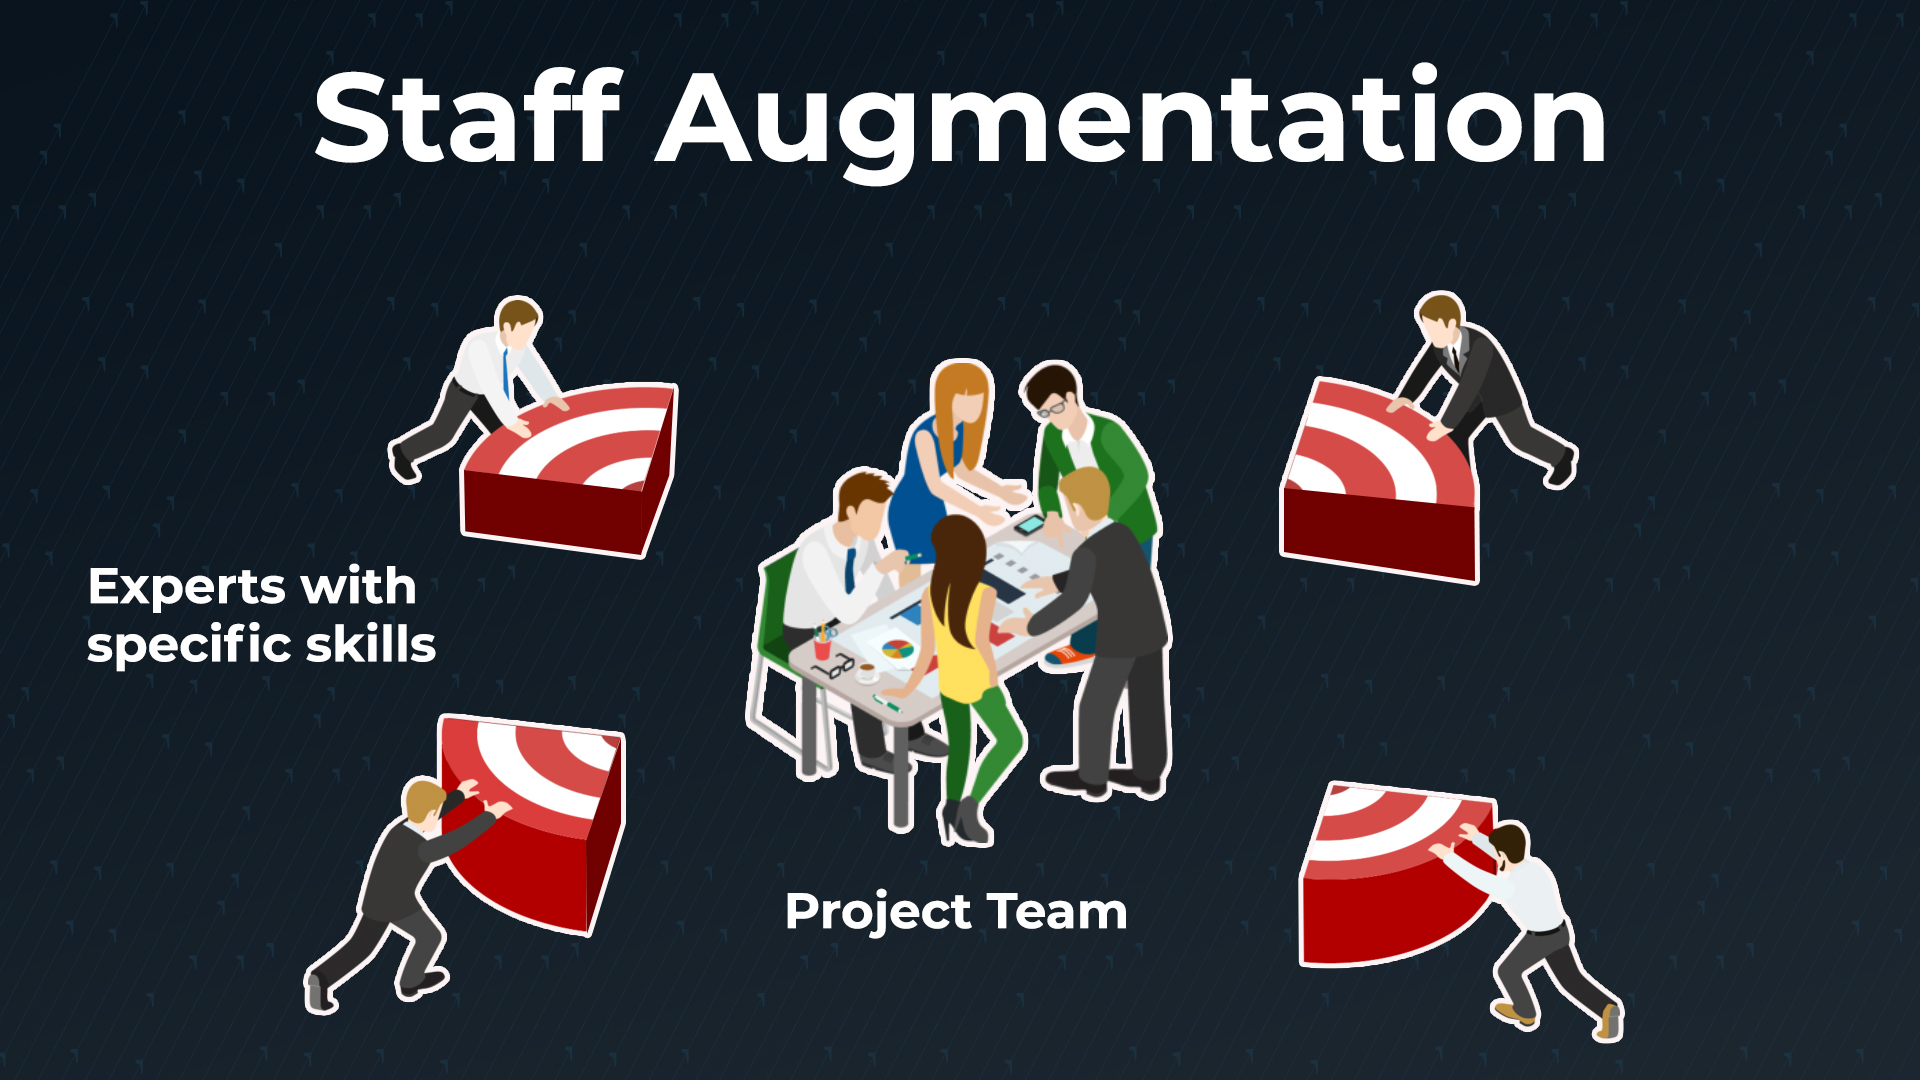 What is staff augmentation